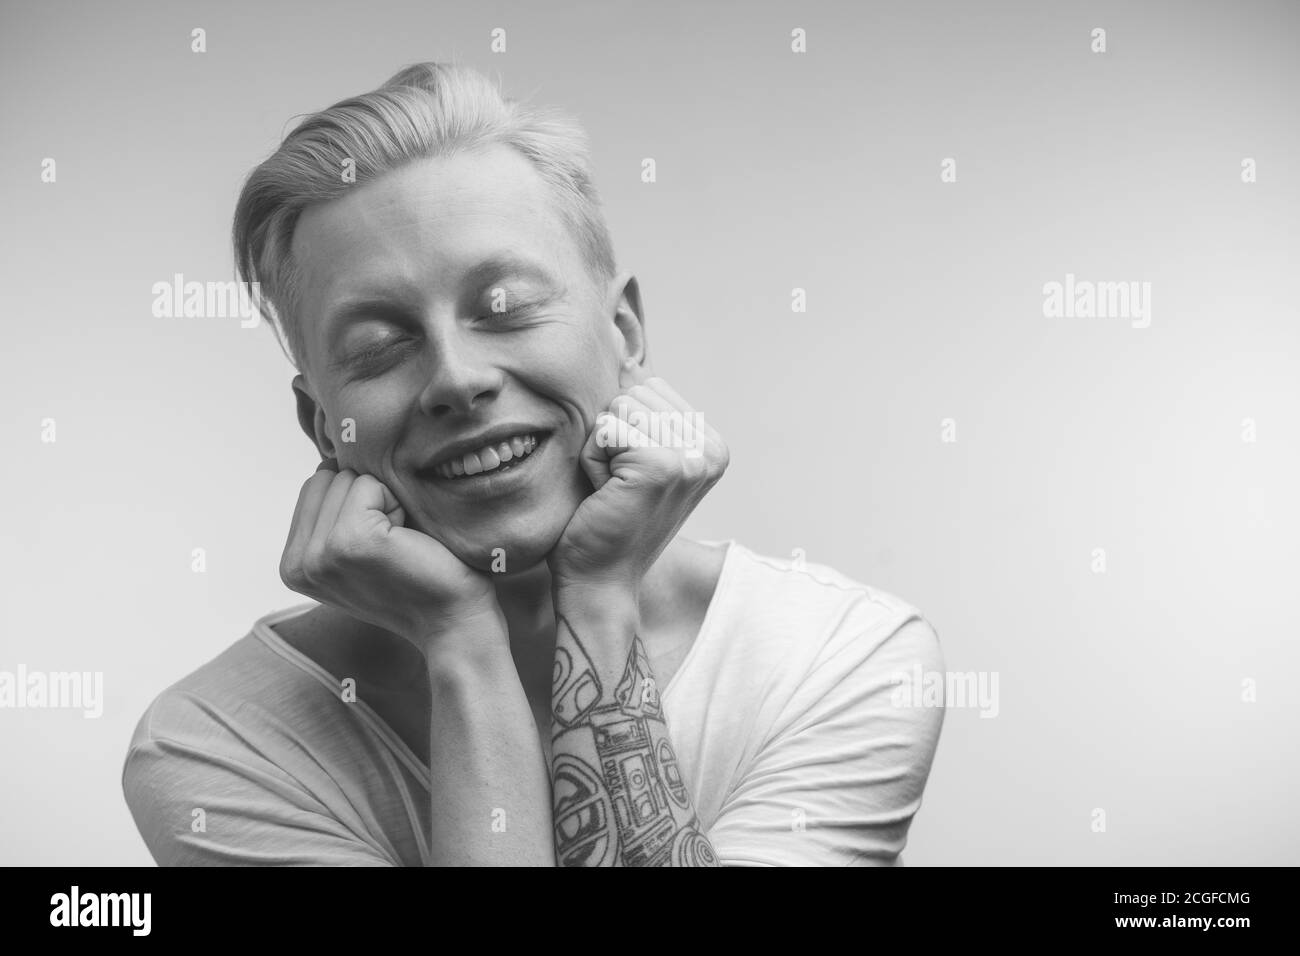 Monochrome shot of happy blonde man with uncommon handsome appearance smiling into camera having pleased dreaming expression being happy with coming h Stock Photo